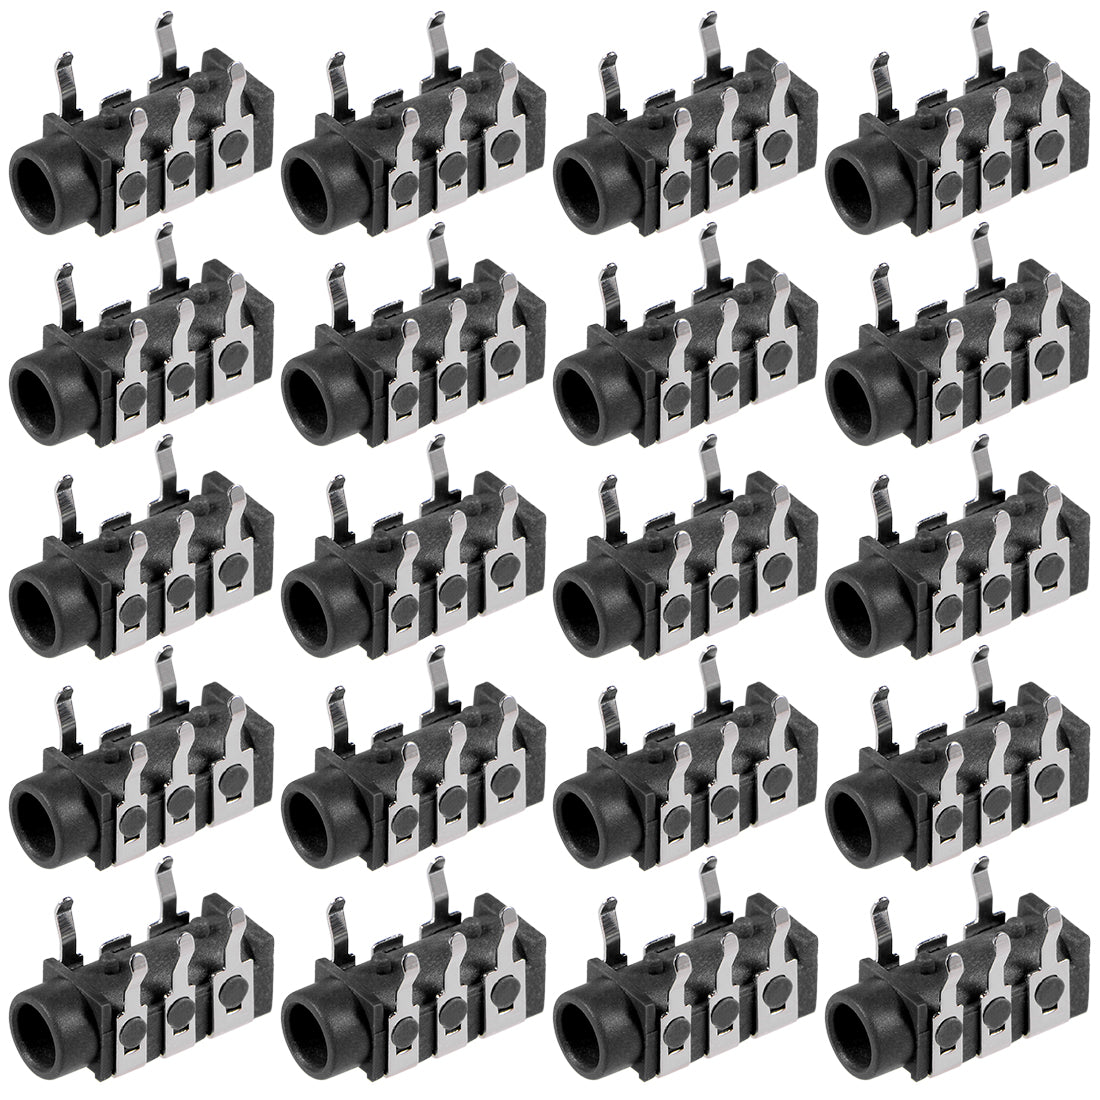 uxcell Uxcell PCB Mount 3.5mm 5 Pin Socket Headphone Stereo Jack Audio Video Connector PJ313 Black 20Pcs